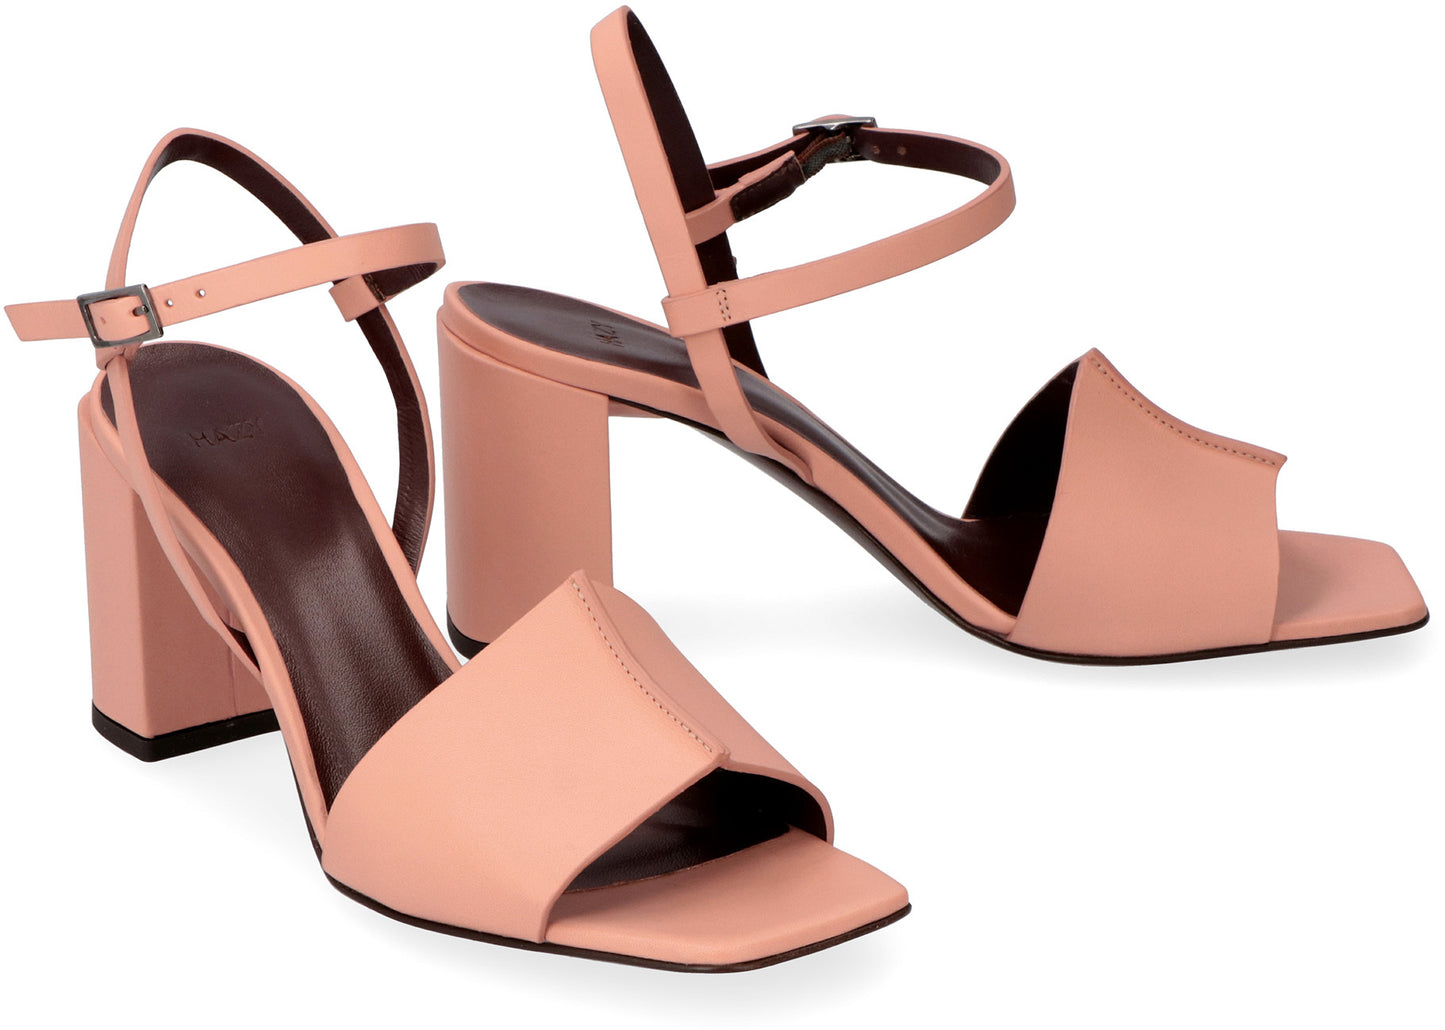 Heeled leather sandals